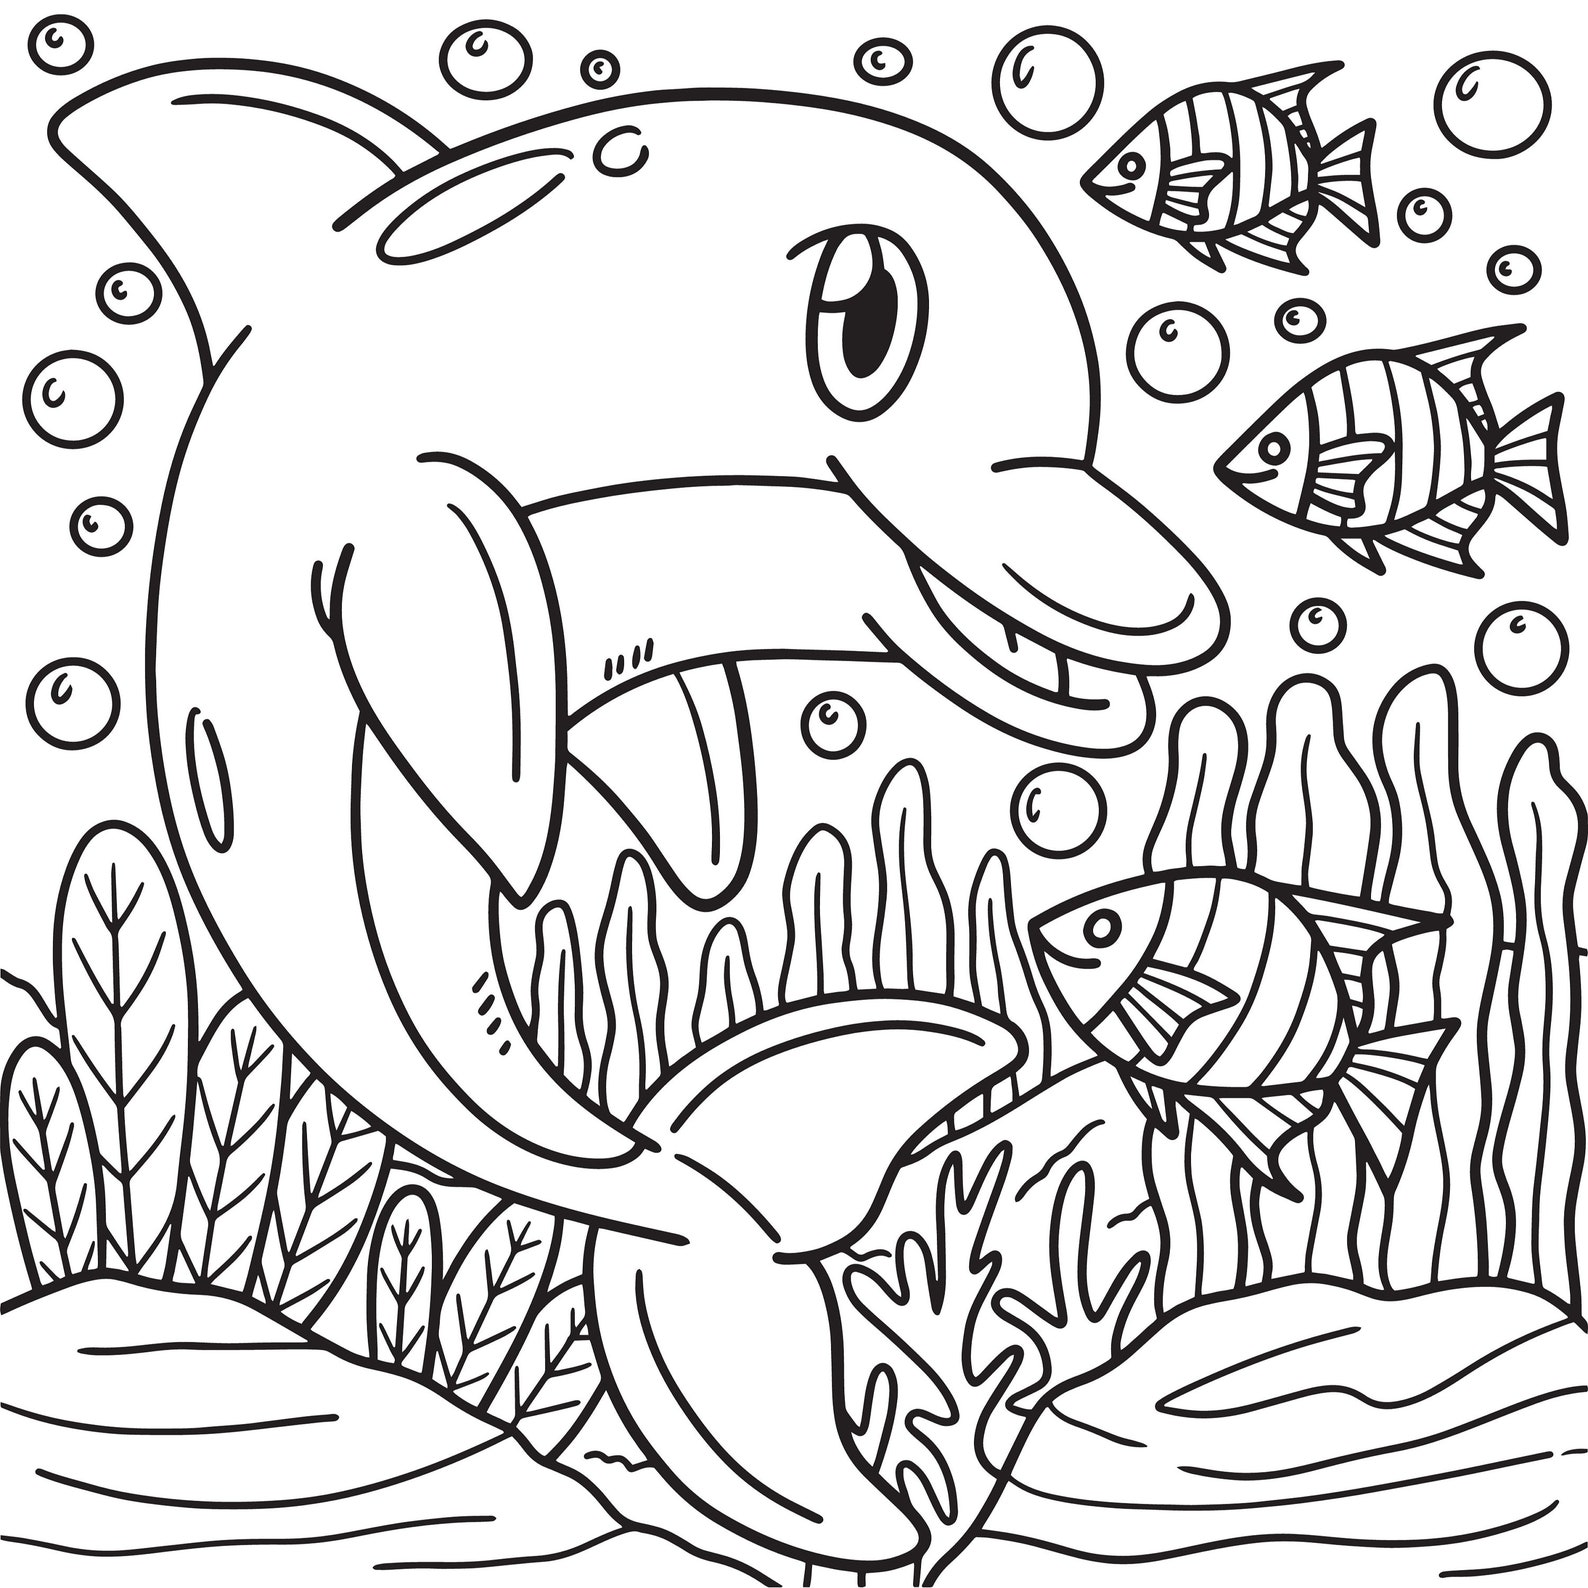 Printable Oceanlife Coloring Pages for Kids, Sea Life Coloring Pages ...